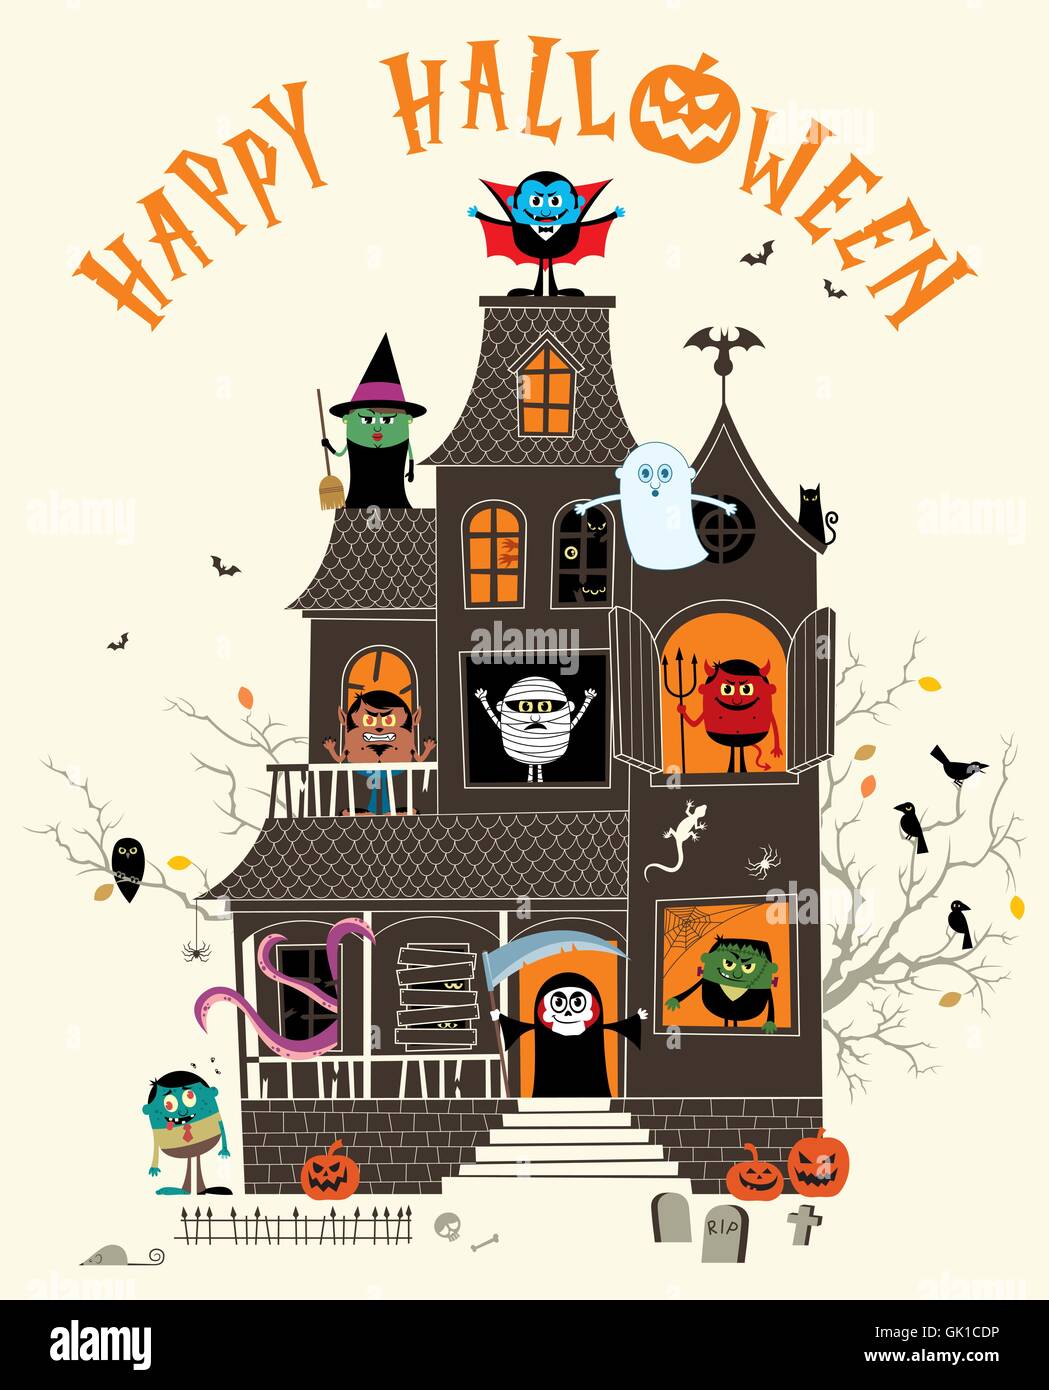 Halloween illustration with spooky haunted house full of monsters. Stock Vector